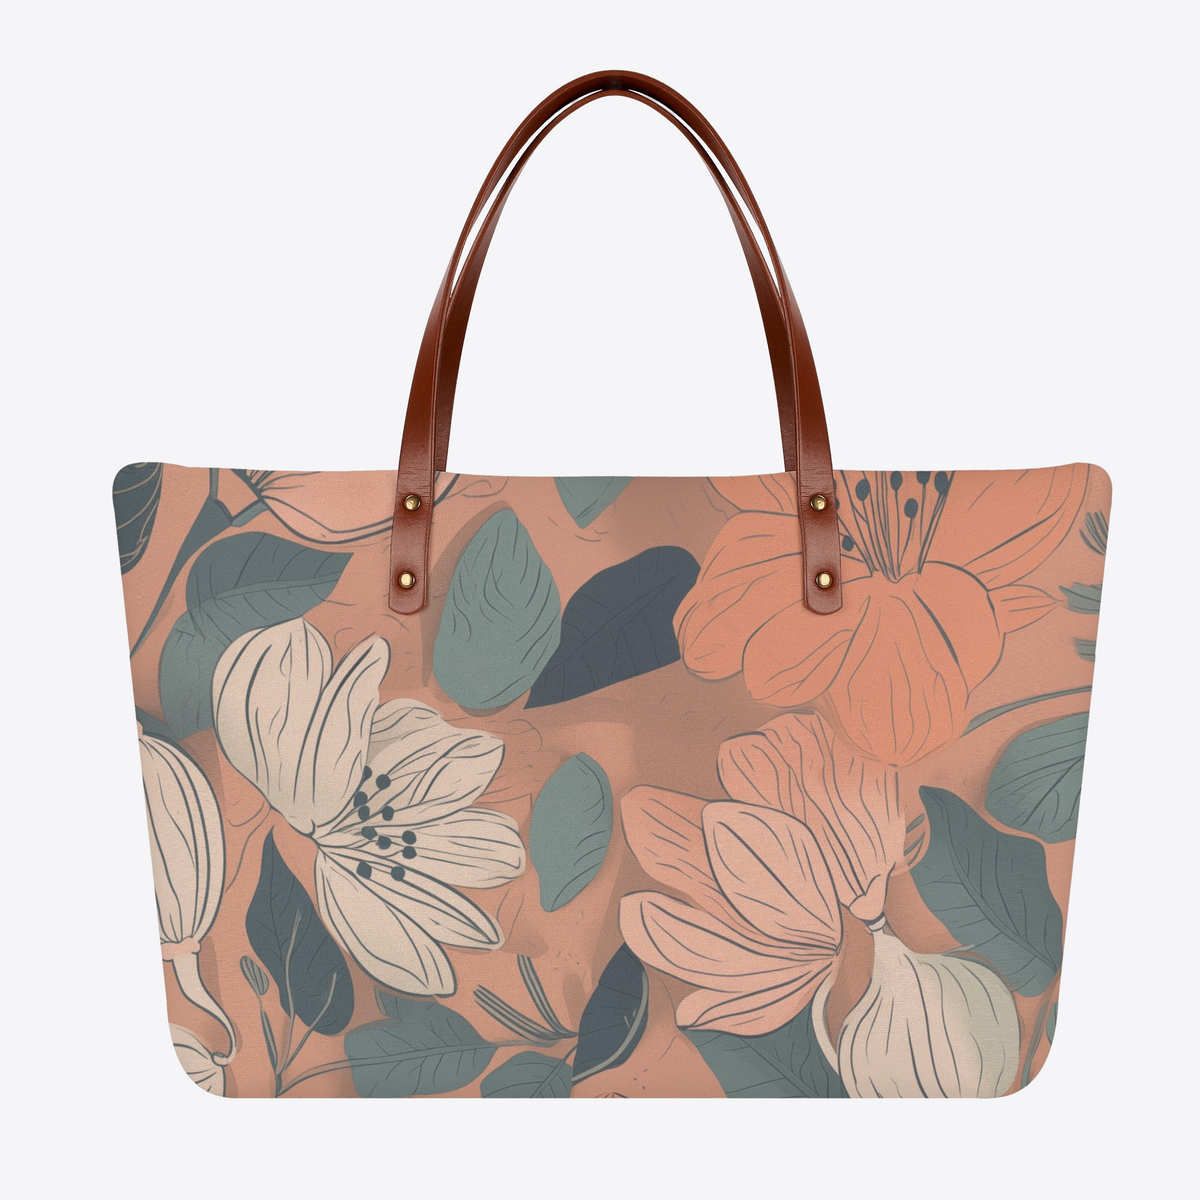 Petal Pink Floral Vegan Leather Tote Bag | Hypoallergenic - Allergy Friendly - Naturally Free